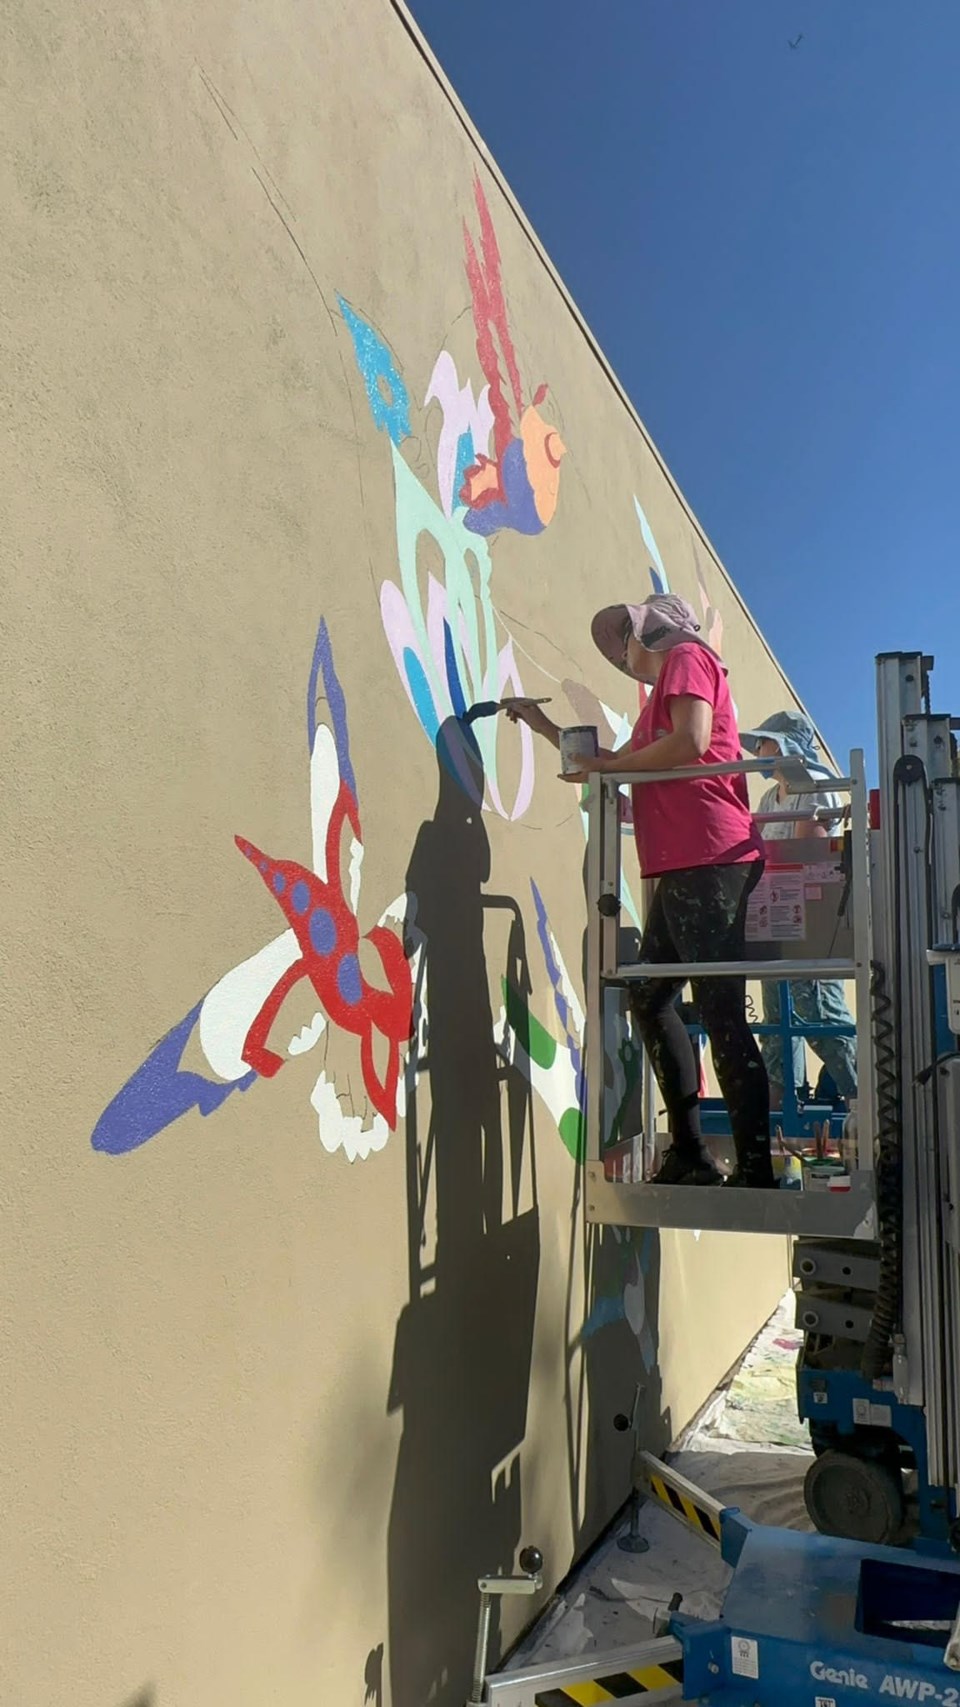 artwork-in-progress-kelsey-montague-creates-her-mural-for-palo-alto-skin-clnic-on-sep-13-photo-by-suman-mudamula